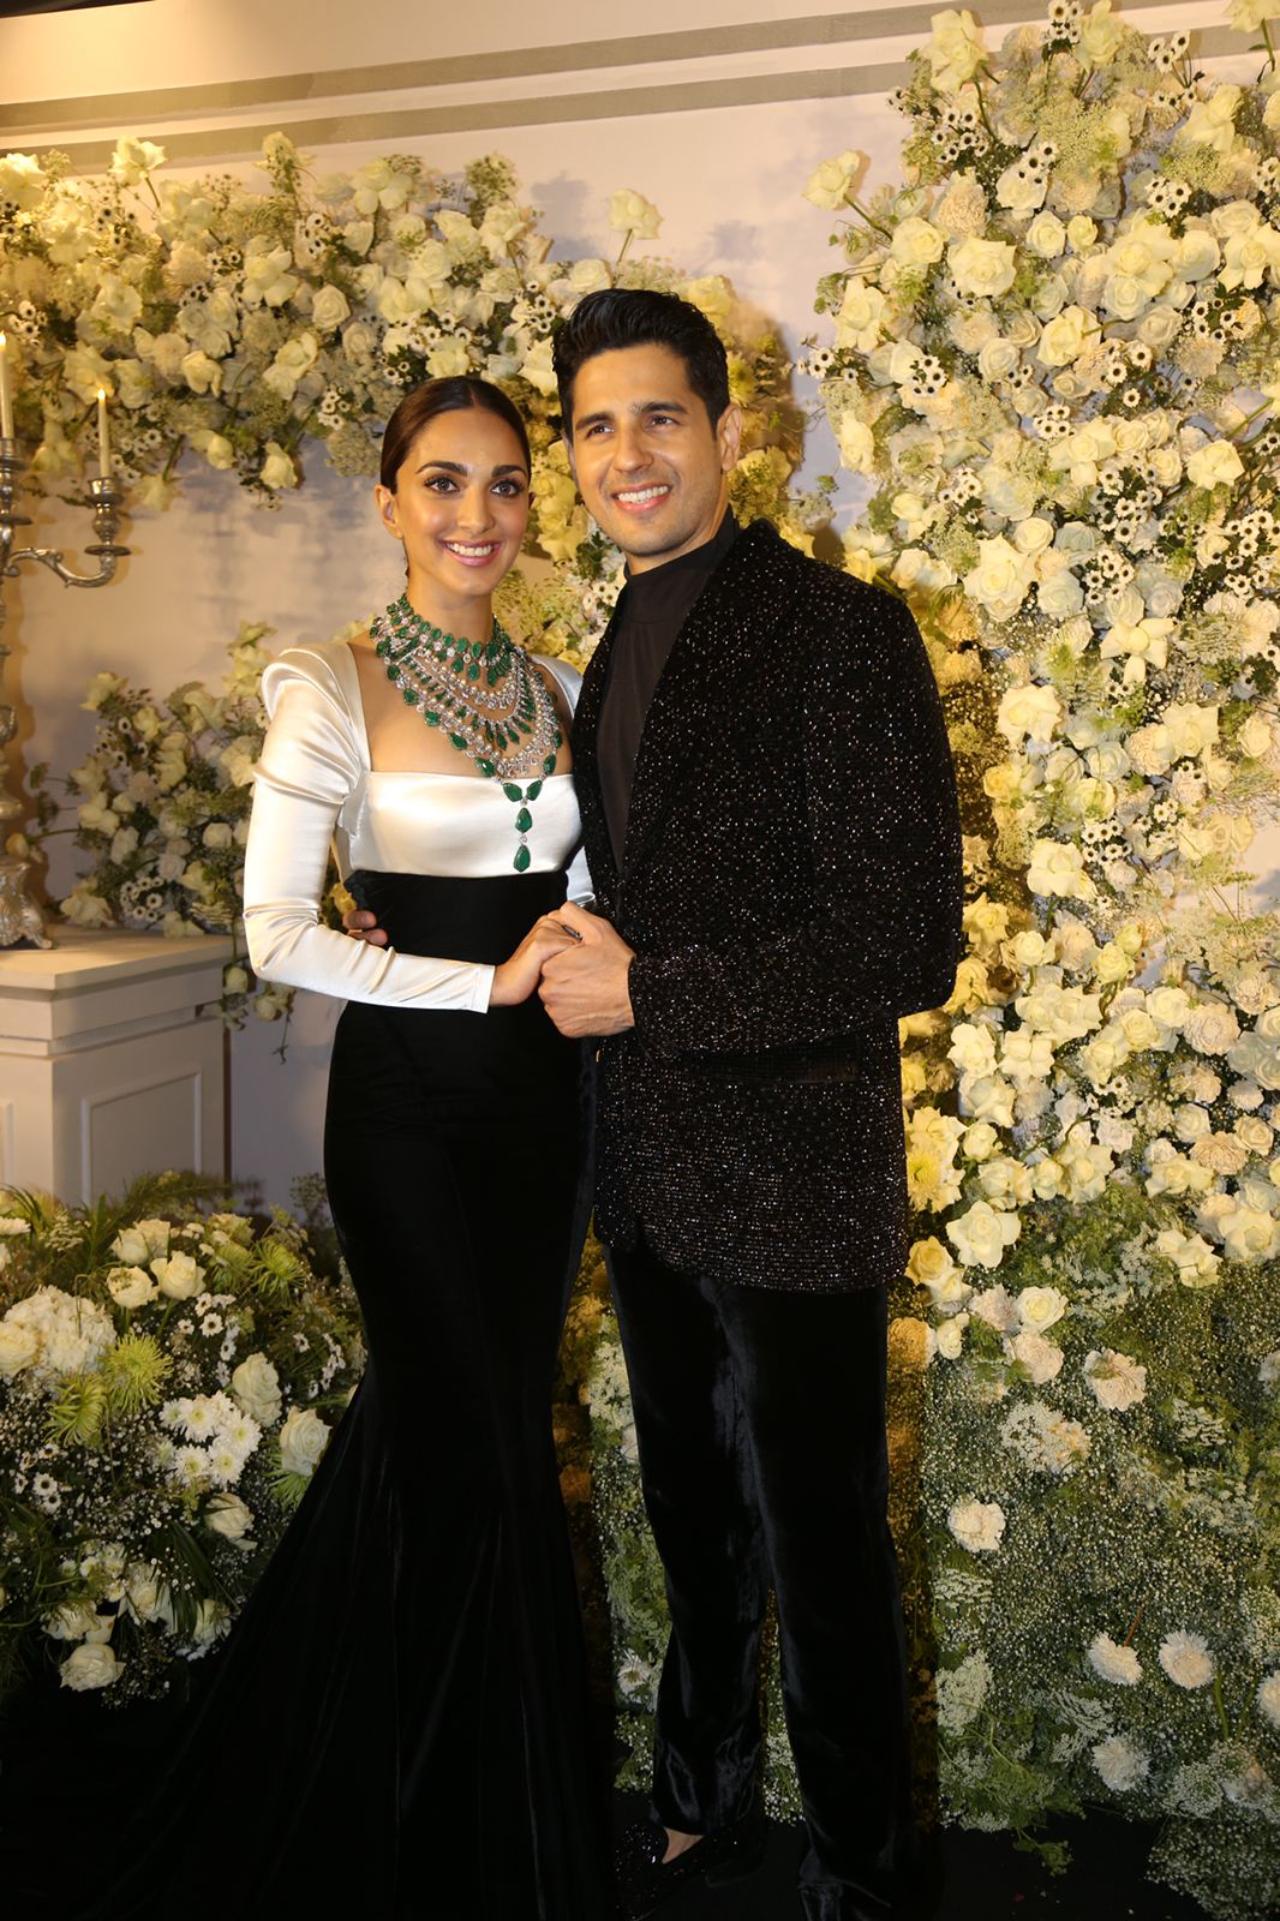 Sidharth and Kiara looked stunning as they posed together for the paparazzi. Kiara looked gorgeous in a white blouse and black body-hugging skirt. Highlight was her emerald neck piece. Sidharth looked dapper in a black suit